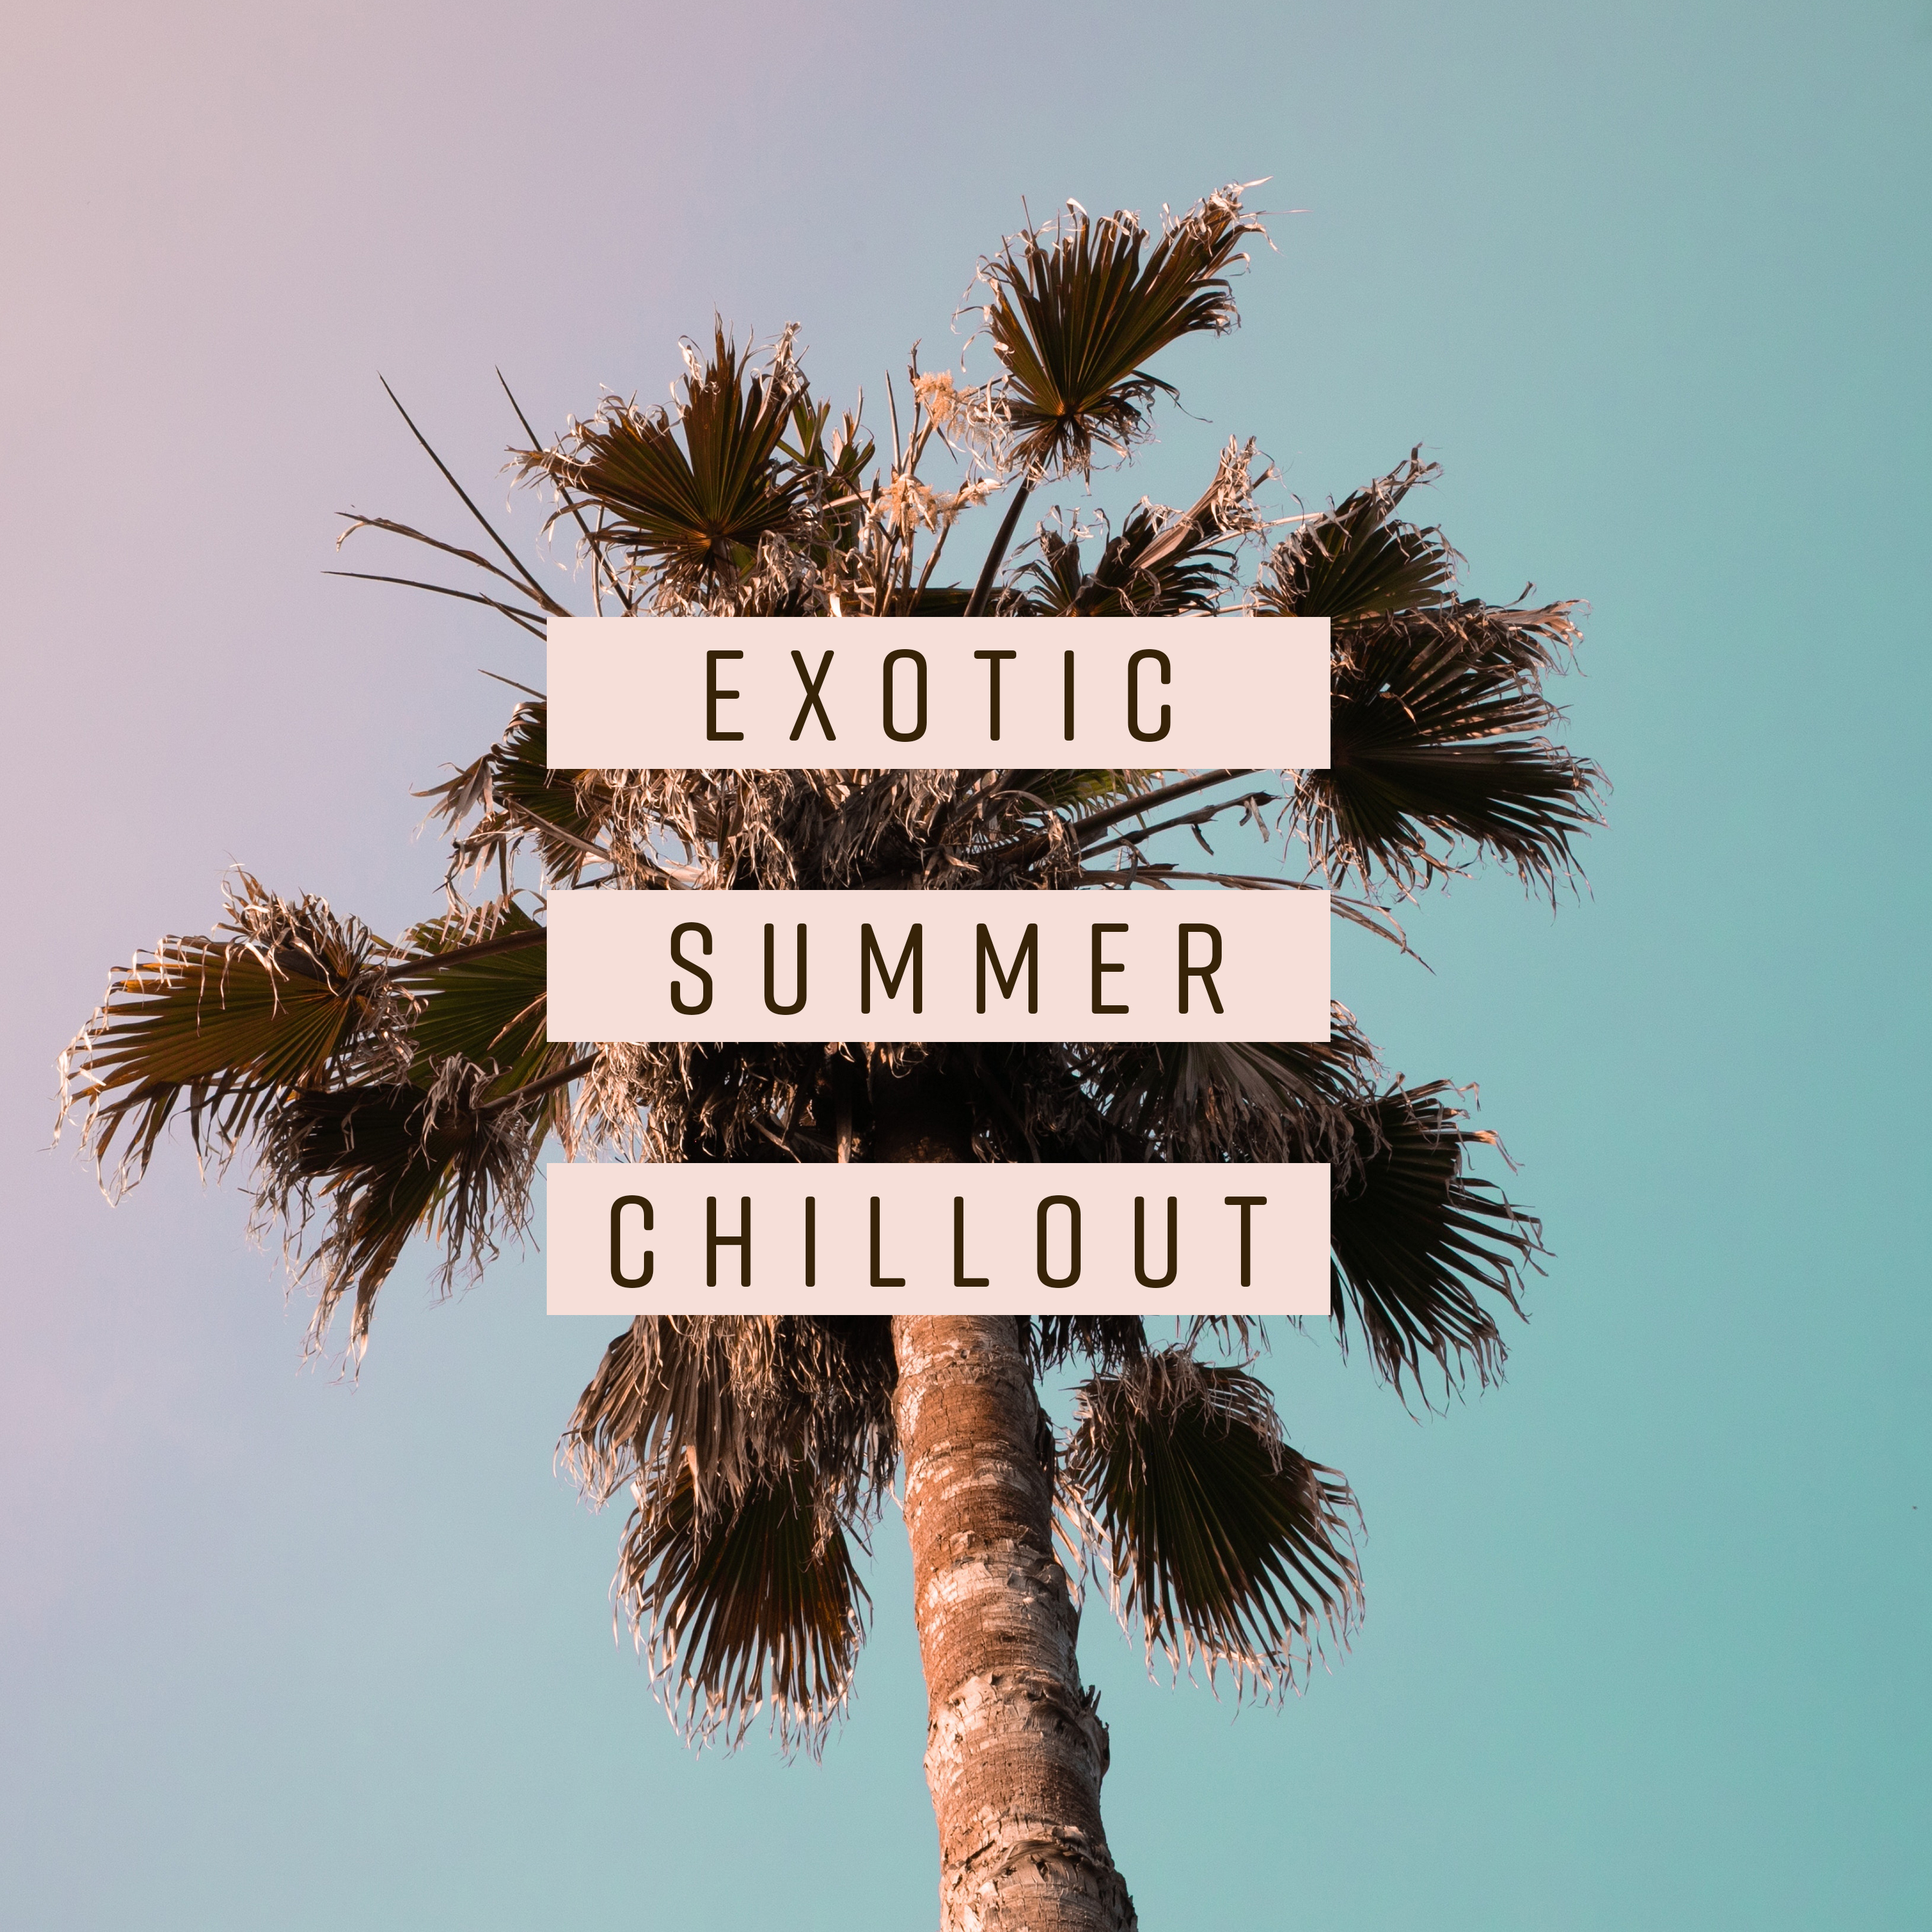 Exotic Summer Chillout